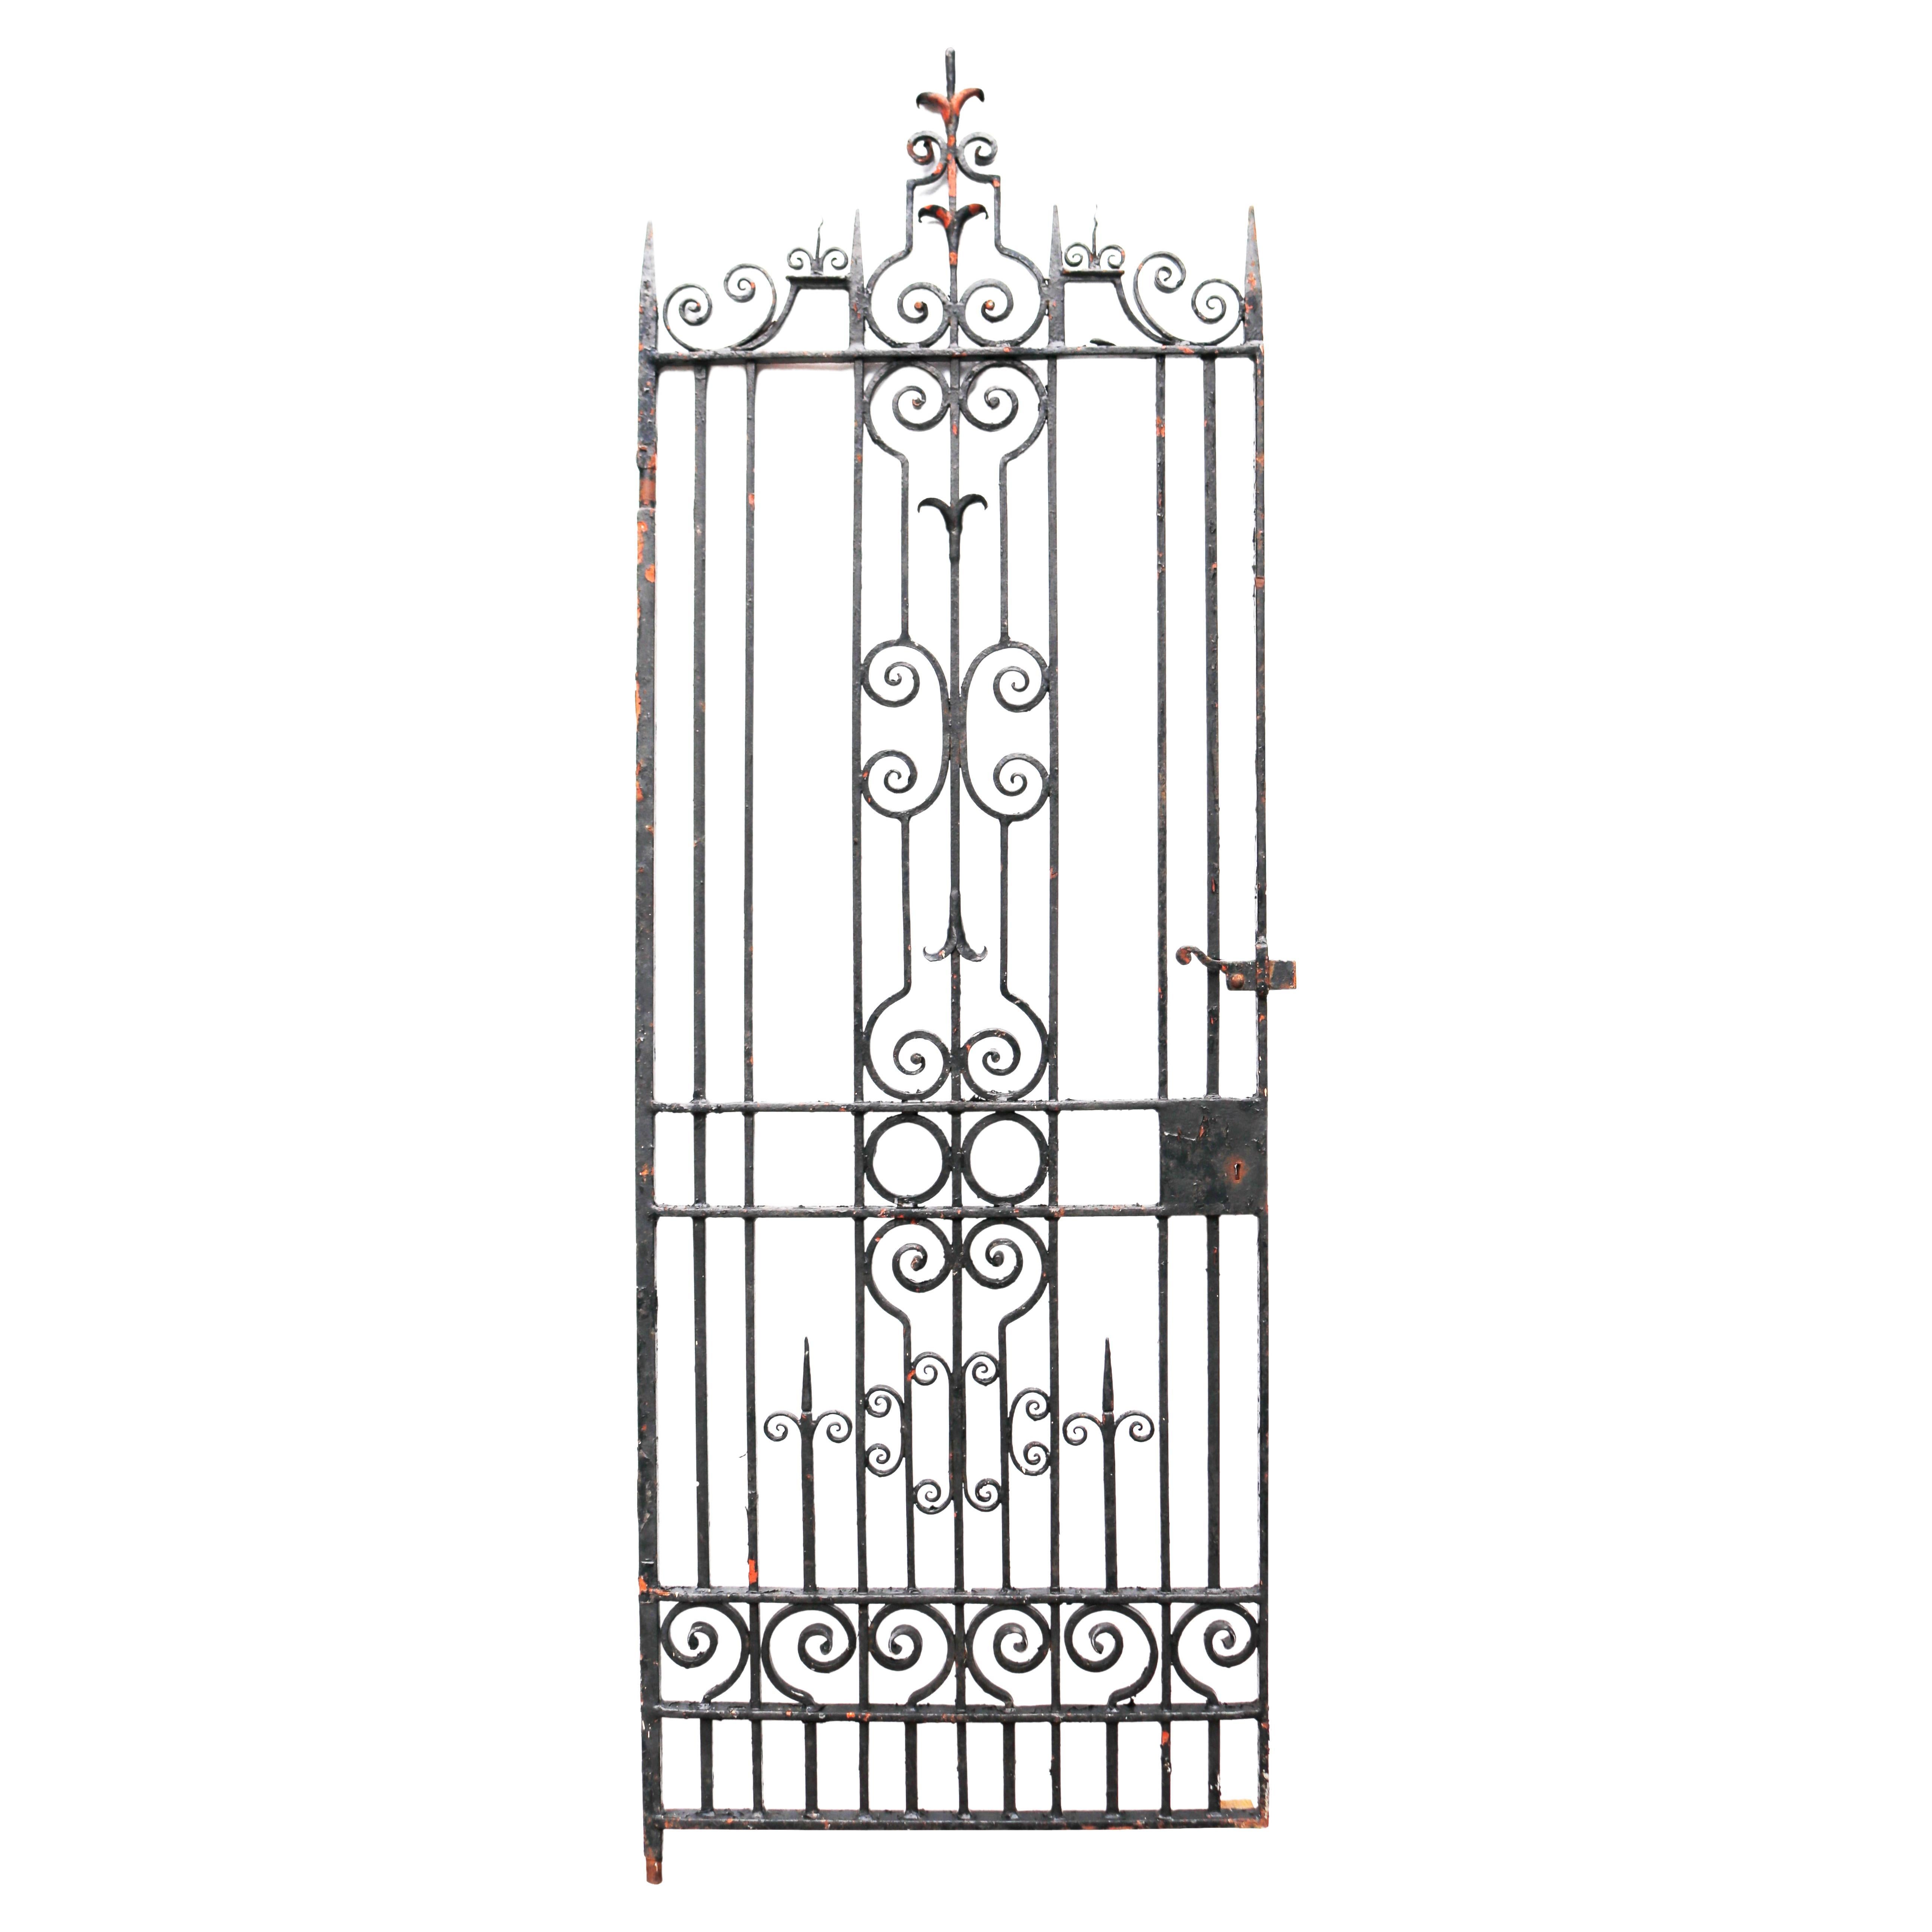 Antique Side Gate Made of Wrought Iron